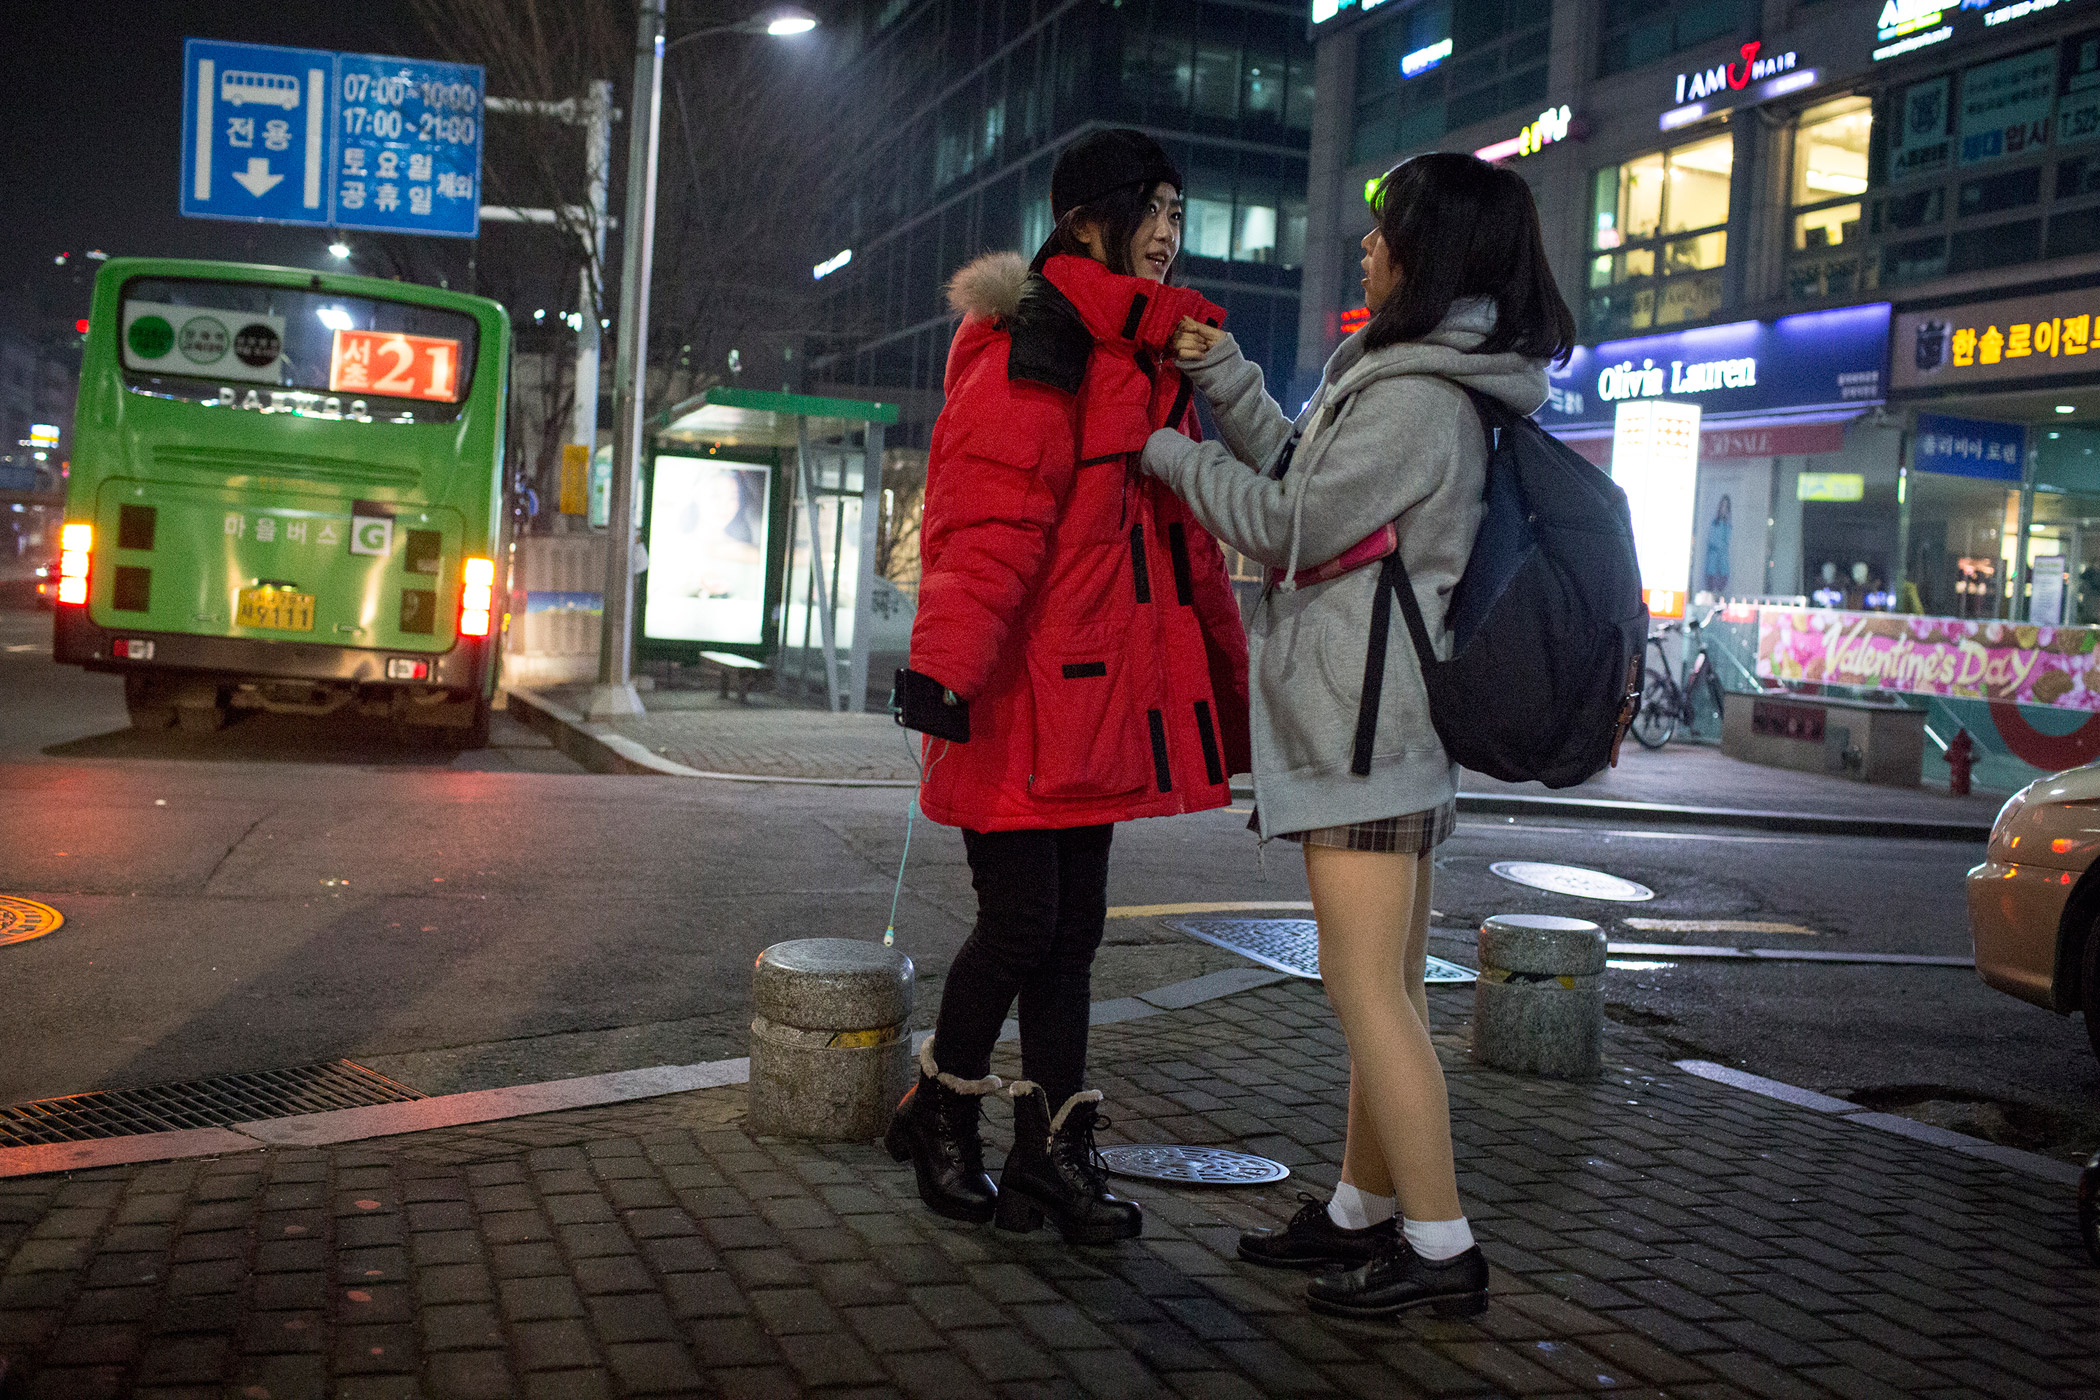 Kyong-ok zips up Sarah's jacket, which she borrowed from her brother, during a night out Feb. 4, 2015 in Seoul, South Korea. The community of North Korean refugees is growing smaller and more tight knit with the help of social networks and human rights groups. Caitlin O'Hara